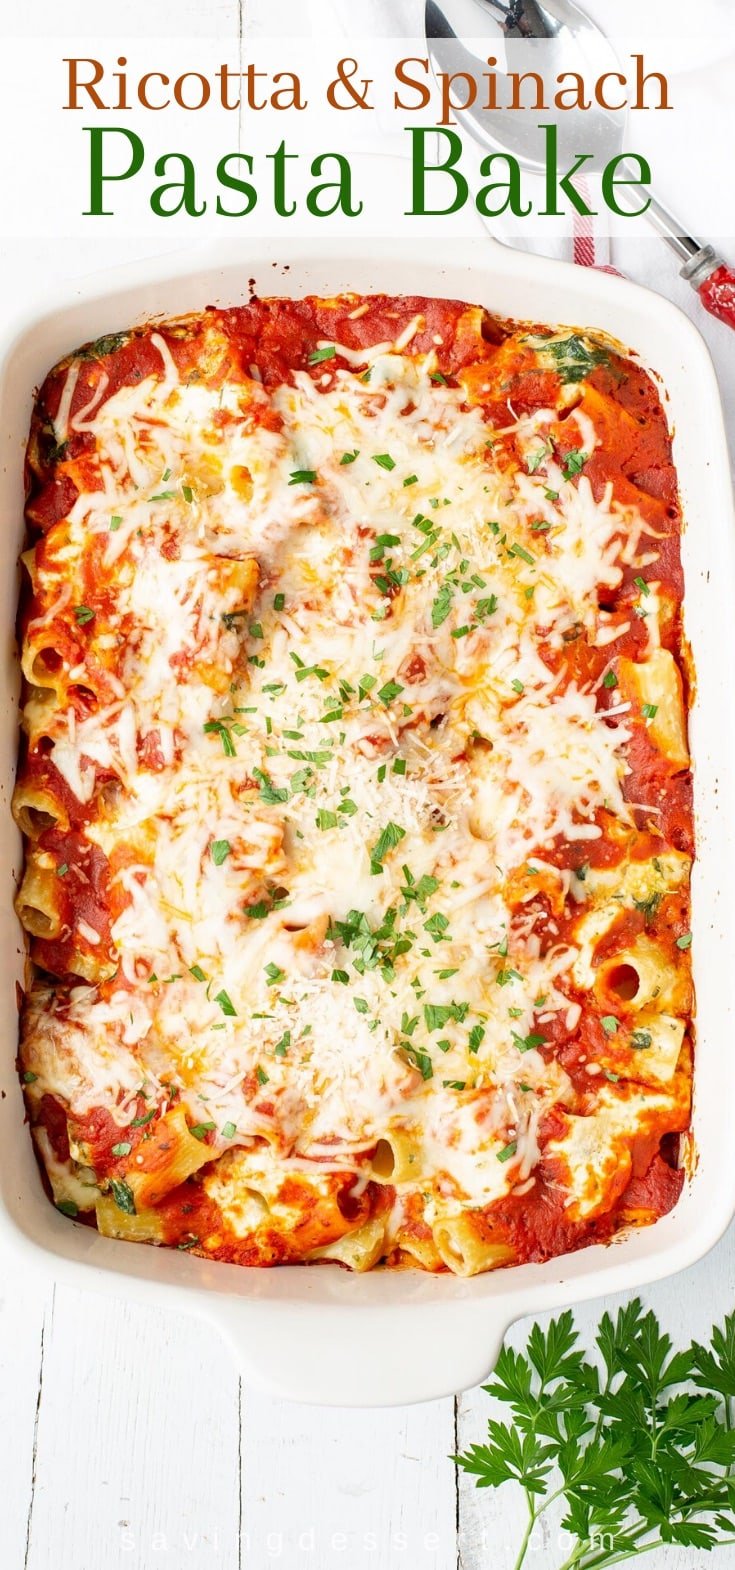 A casserole filled with a ricotta pasta and spinach recipe topped with cheese